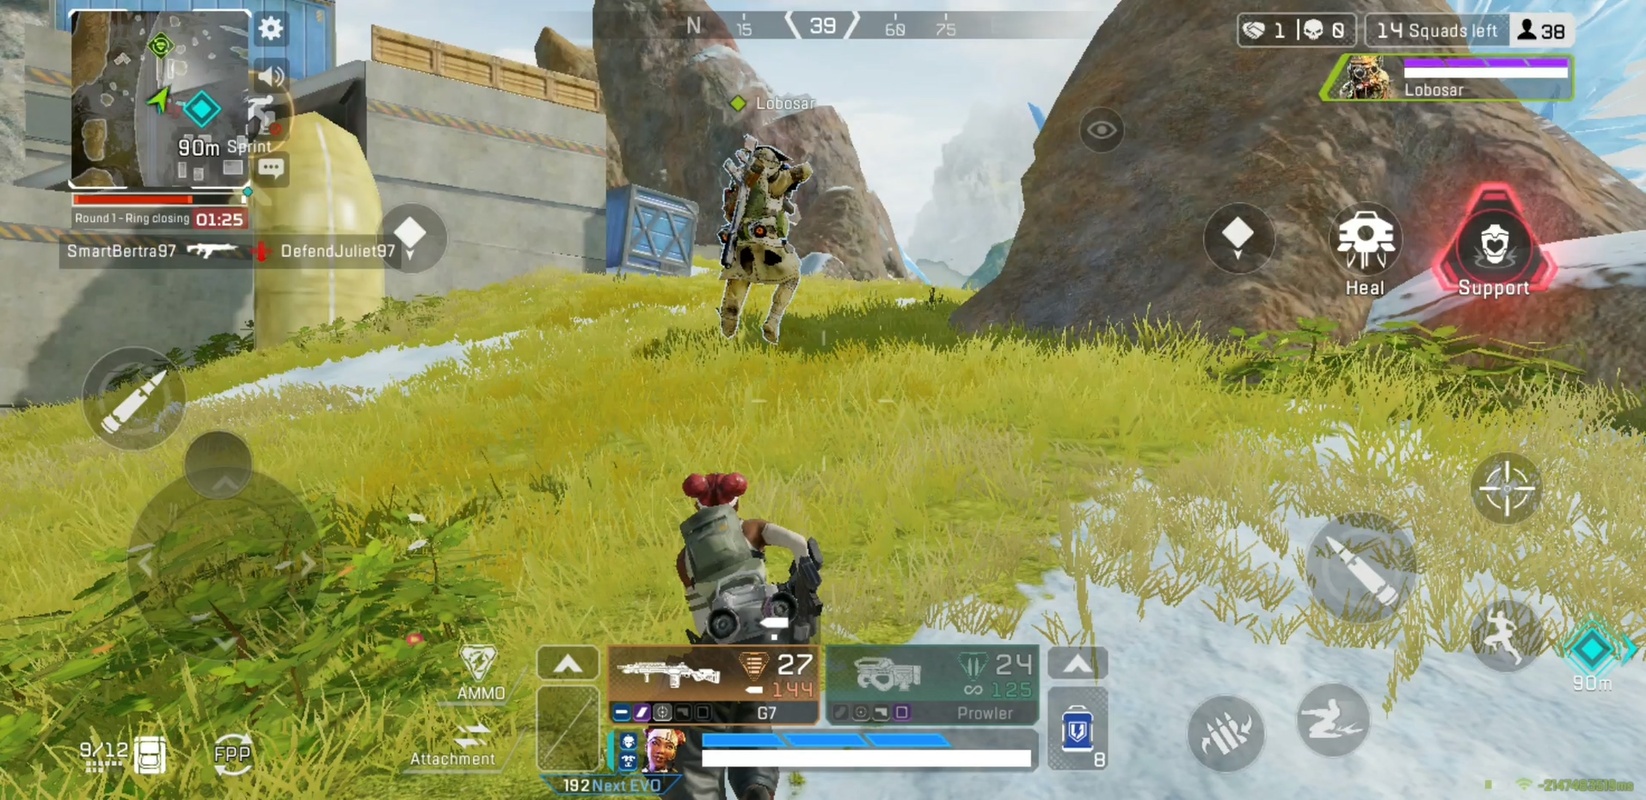 How to Pre-Register for Apex Legends Mobile Right Now on Android